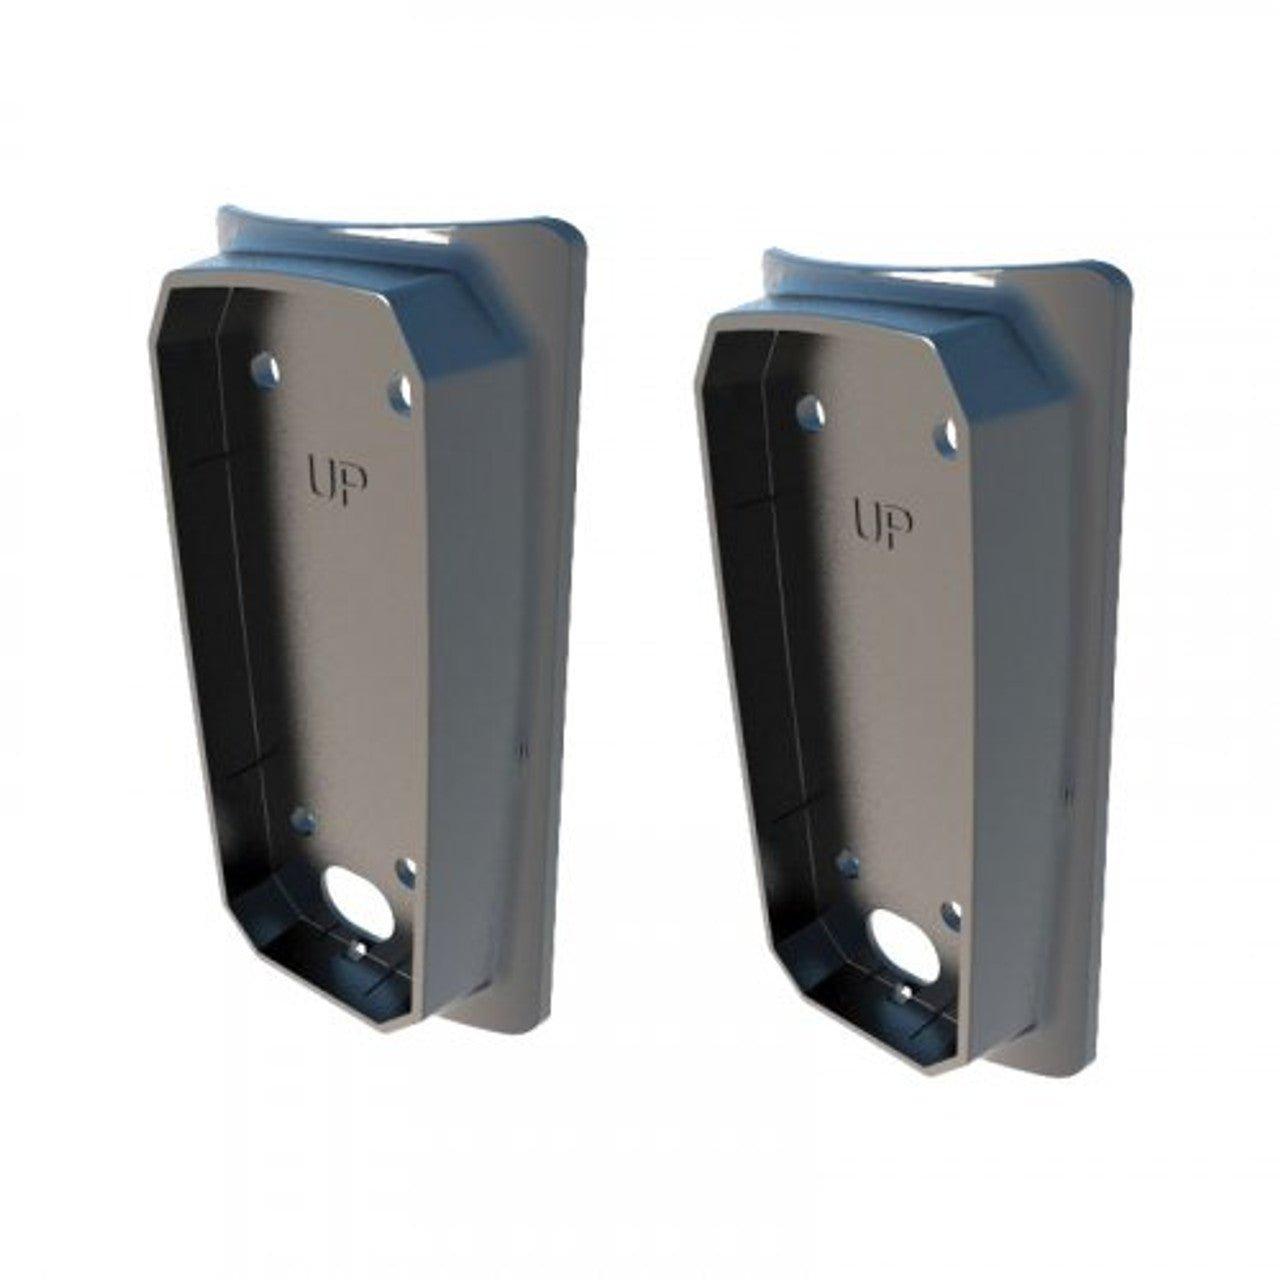 BFT PHP Photocell post (Dual height) - Electric-Gate Kits